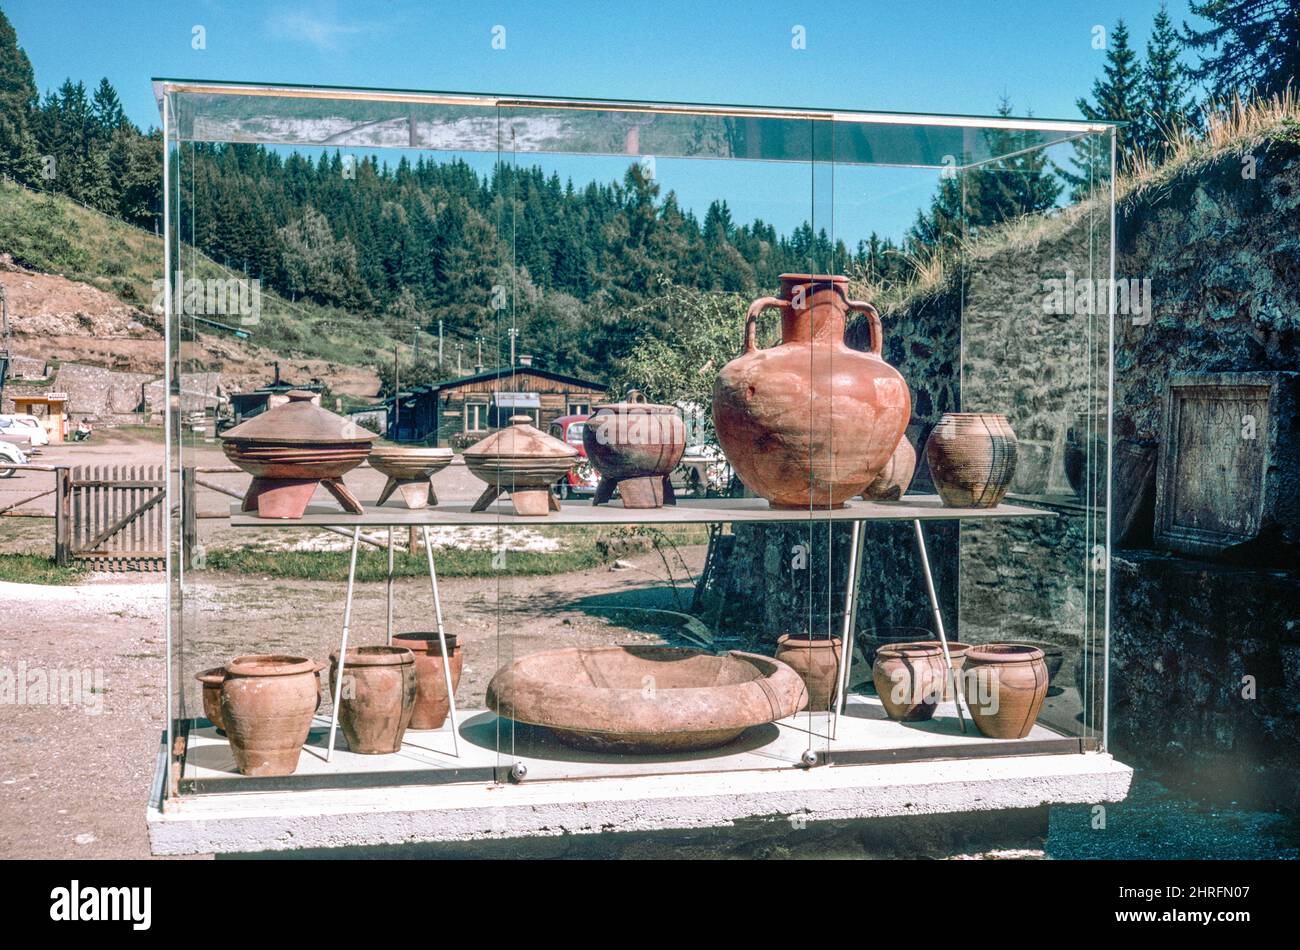 Claudium Virunum - Roman city ruins in the province of Noricum, on the hilltop of Magdalensberg, Carinthia in Austria. Pottery. Archival scan from a slide. September 1969. Stock Photo